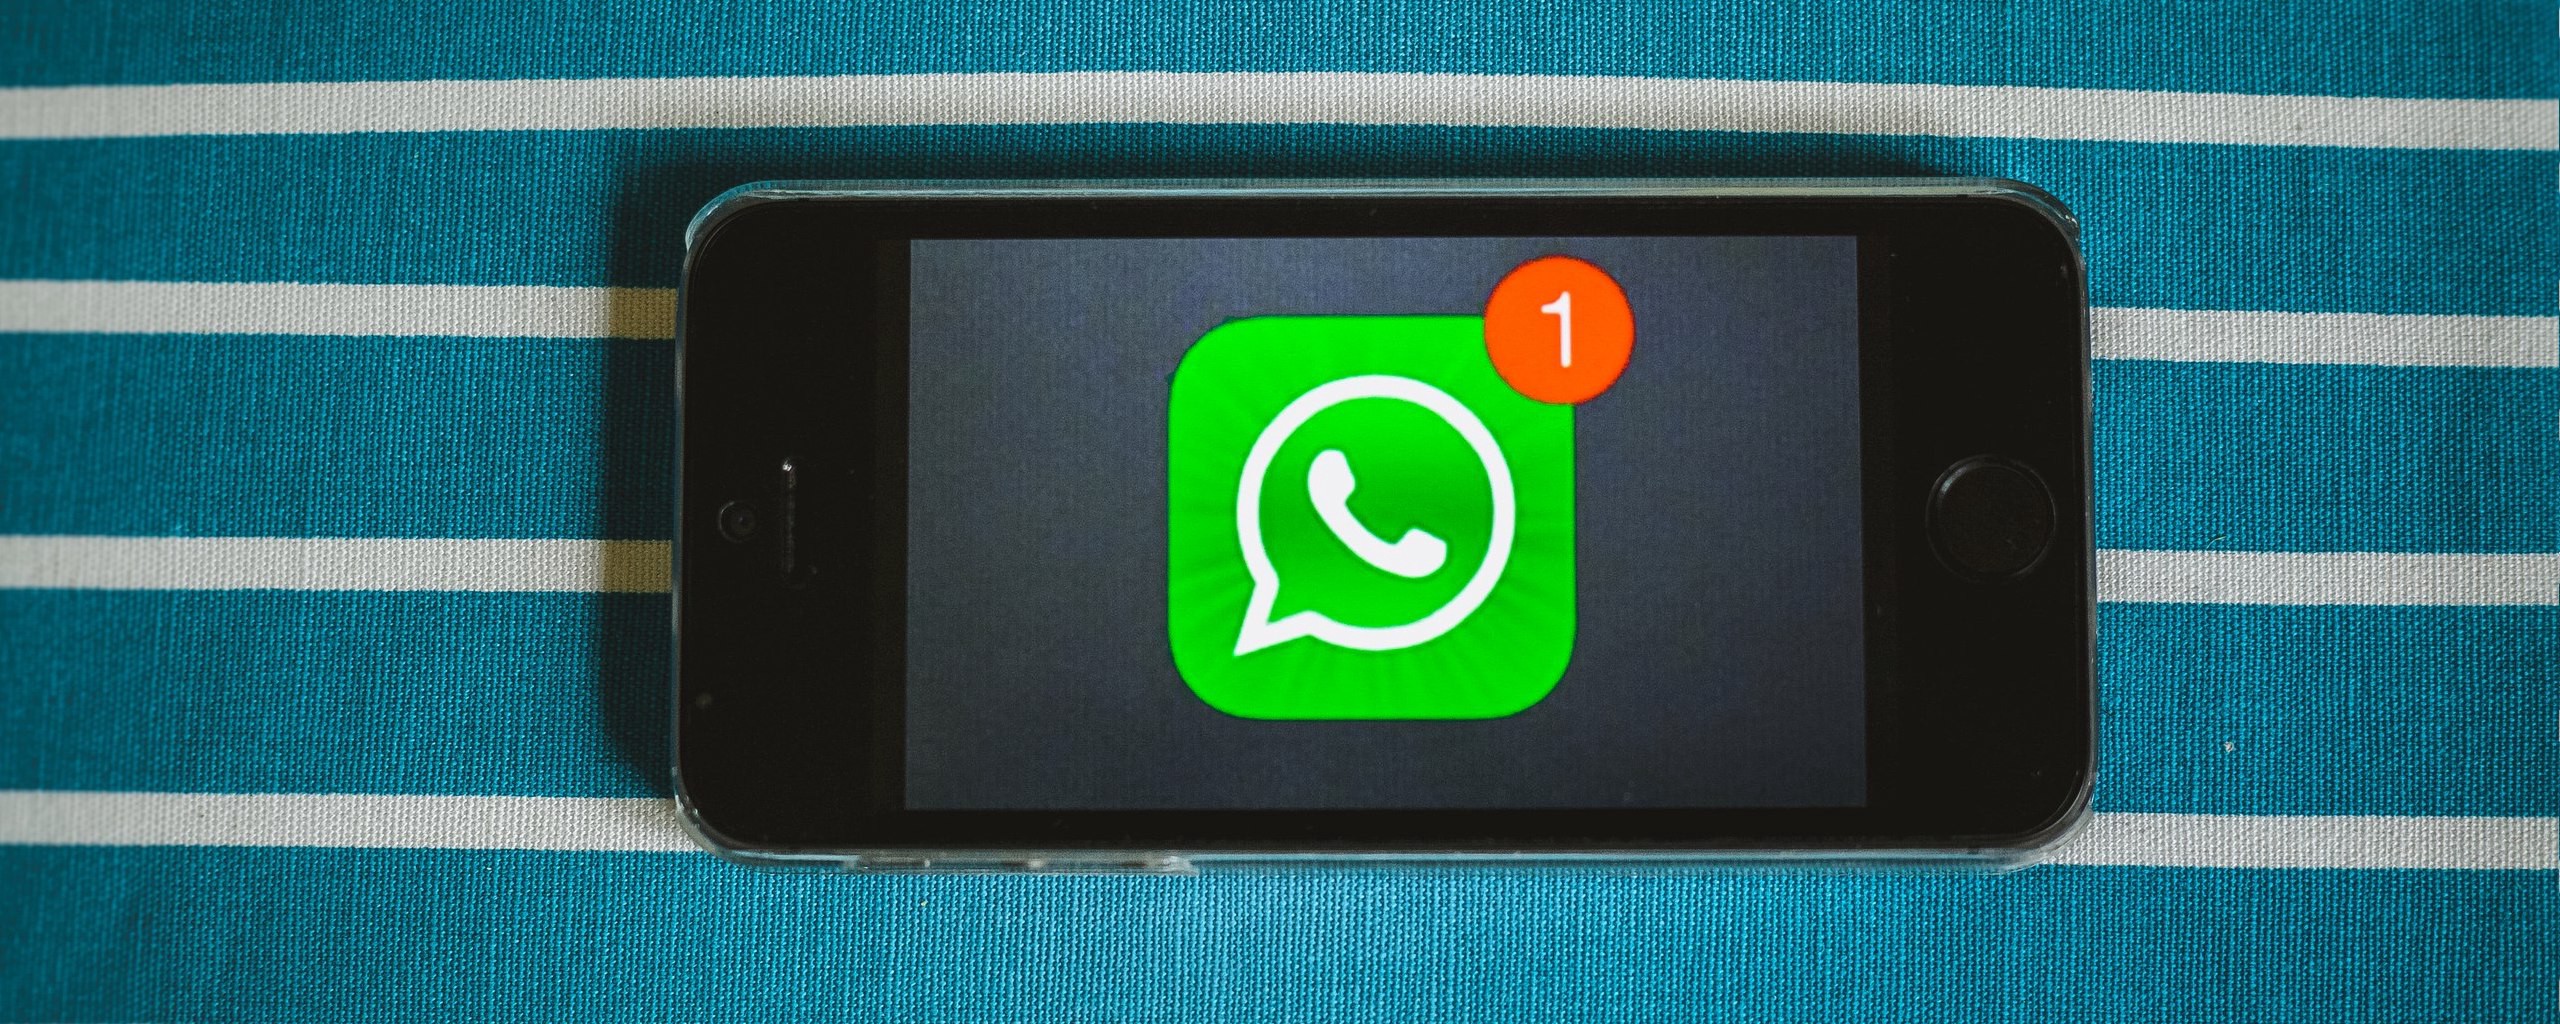 Mobile phone showing the WhatsApp logo with one notification